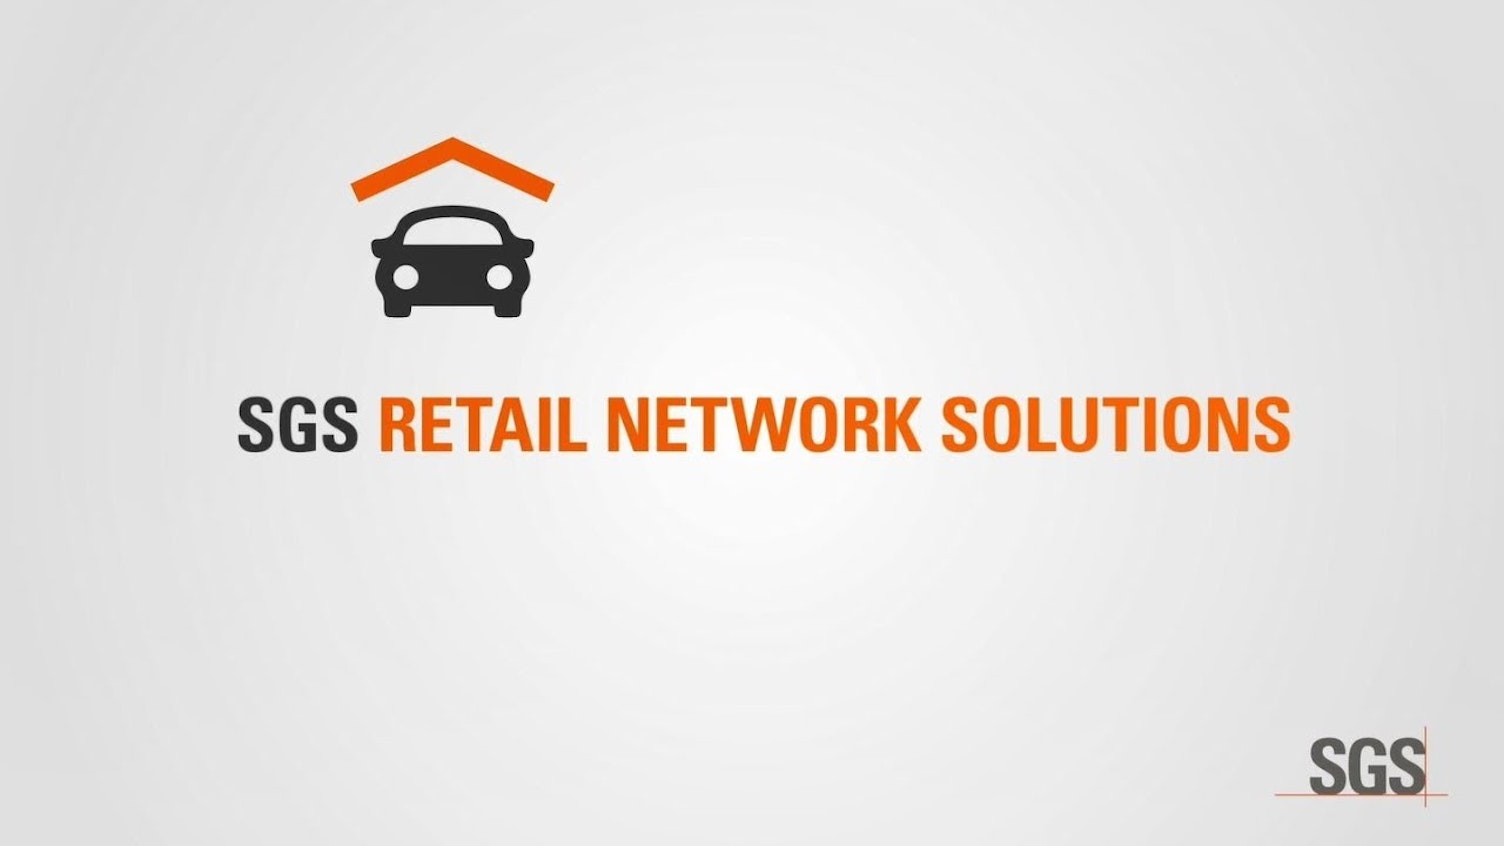 SGS Retail Network Solutions for Automotive OEMs and Car Dealerships